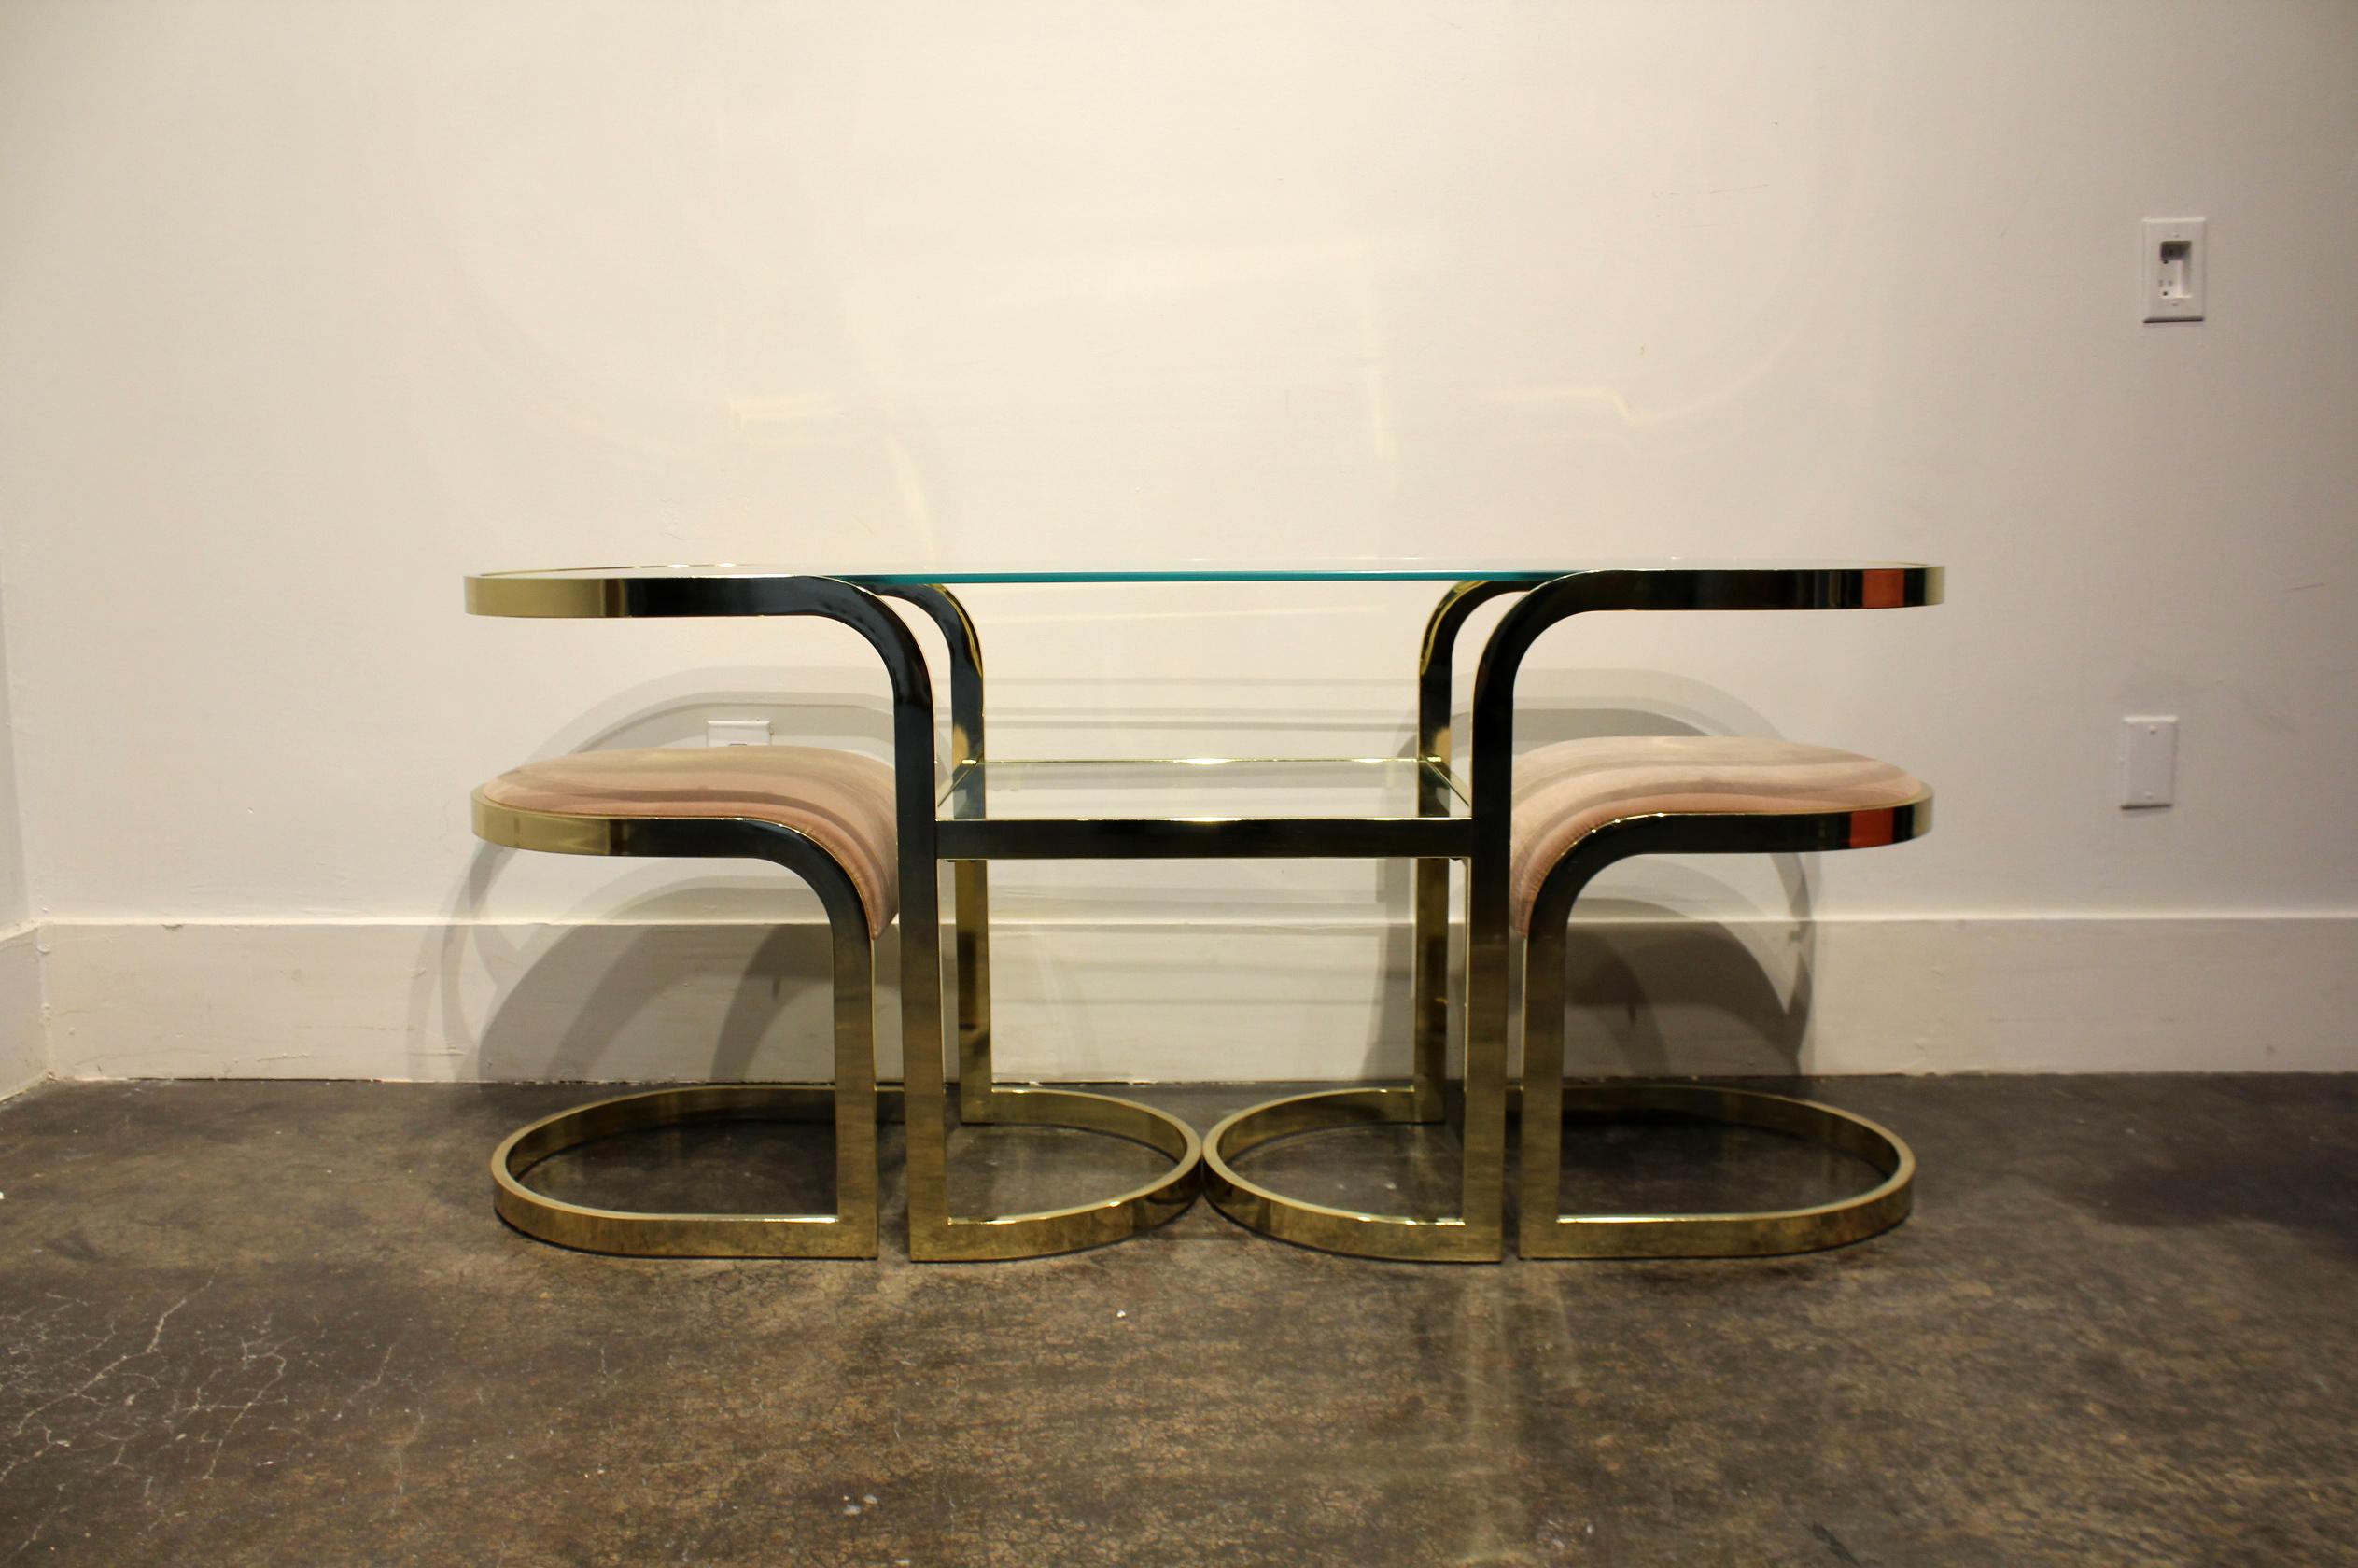 Brass Console Cafe Table with Pink Chairs by DIA Design Institute of America (Moderne der Mitte des Jahrhunderts) im Angebot